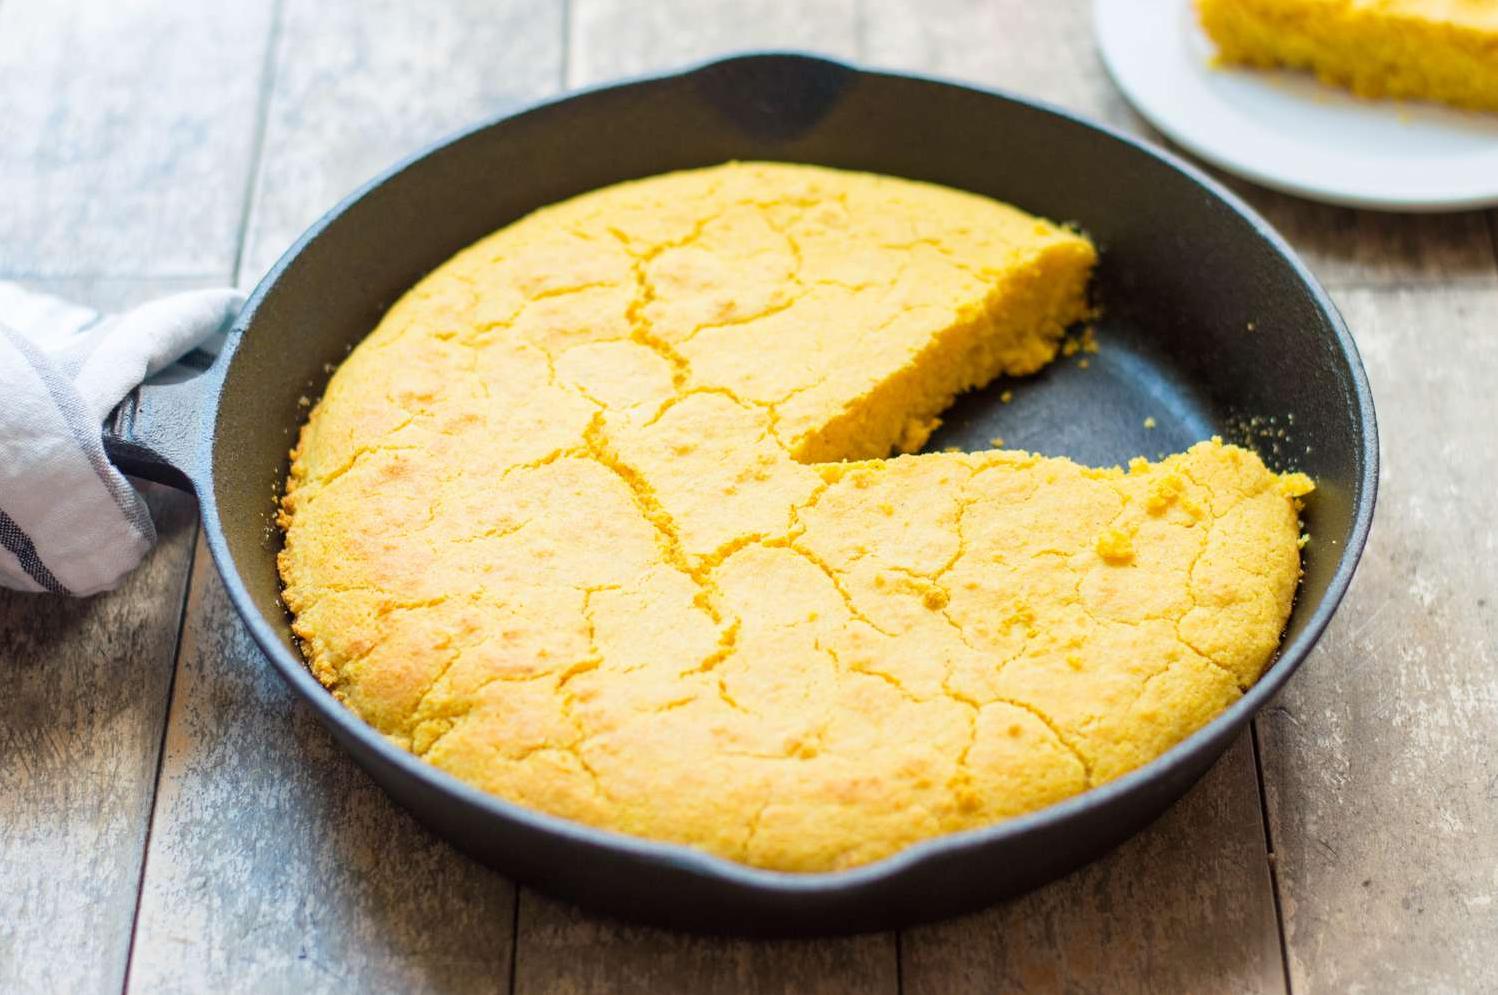  The tangy flavor of buttermilk perfectly balances the sweetness of the cornmeal, making for a mouthwatering experience.